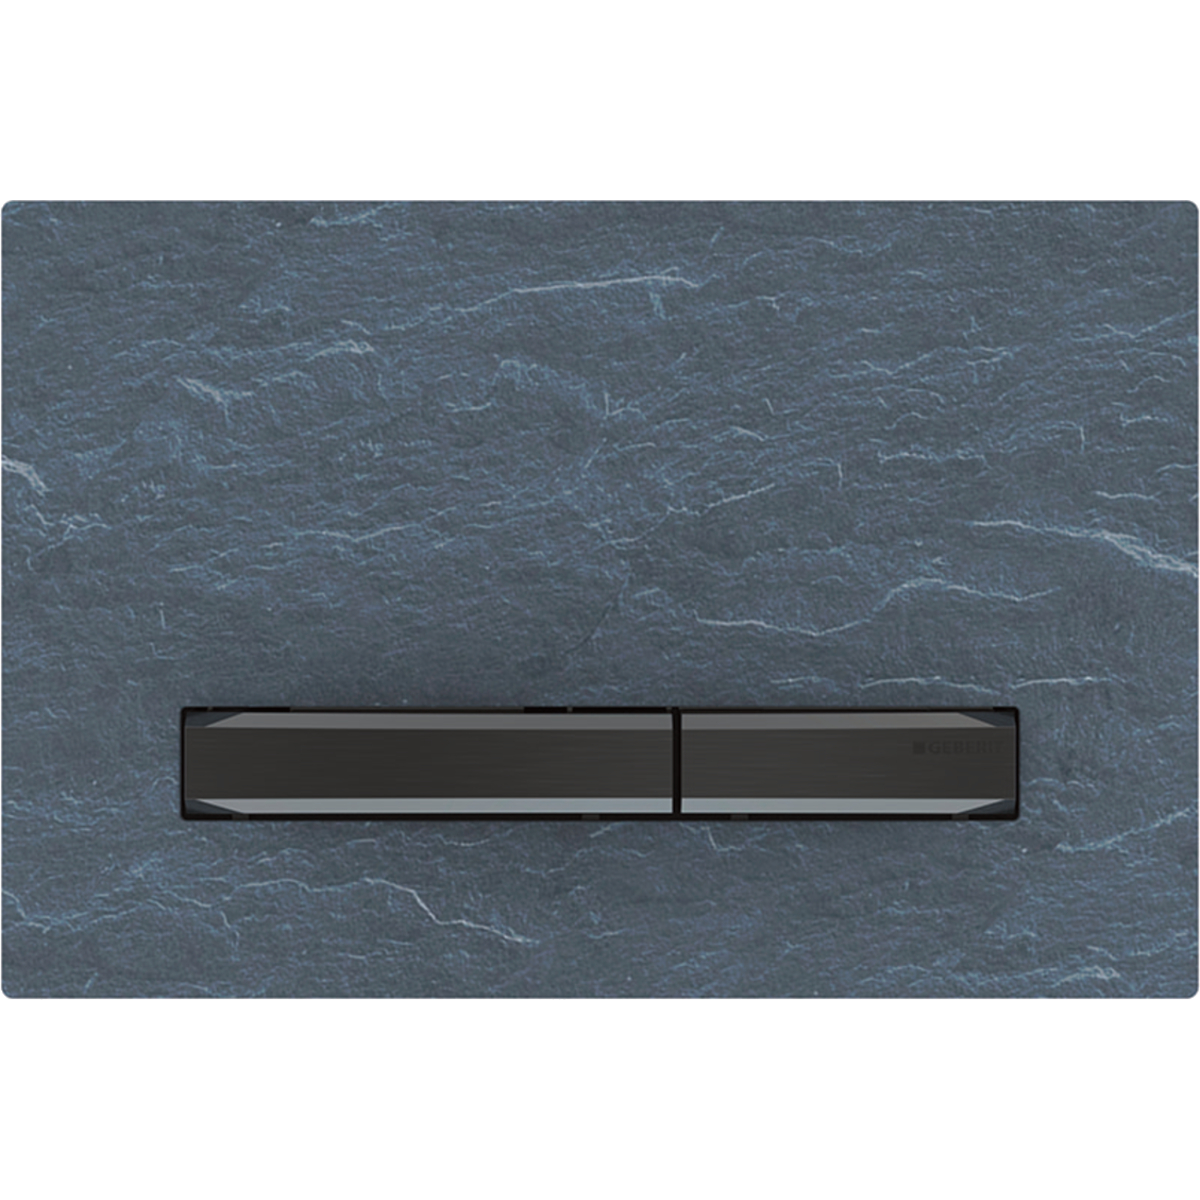 Geberit 115.671.JM.2 Actuator Plate Sigma50 for Dual Flush, Metal Colour Black Chrome - Base Plate and Buttons: Black Chrome/Cover Plate: Mustang Slate